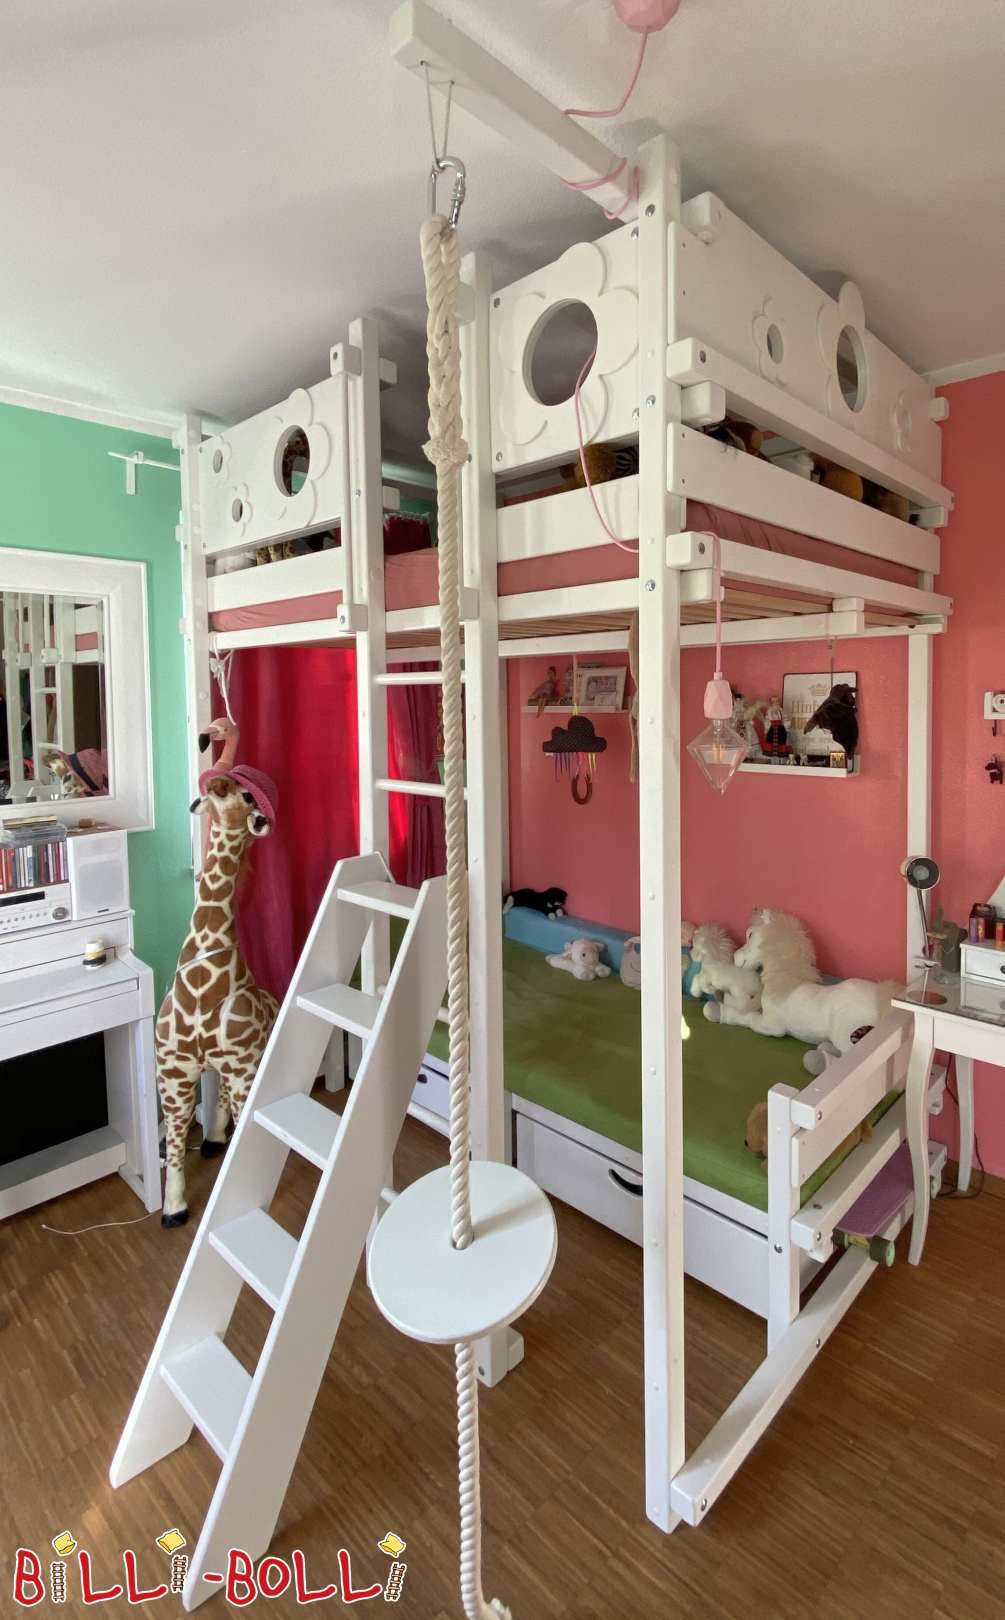 Bunk loft bed in 140 x 200 cm and 90 x 200 cm made of beech (Category: second hand loft bed)